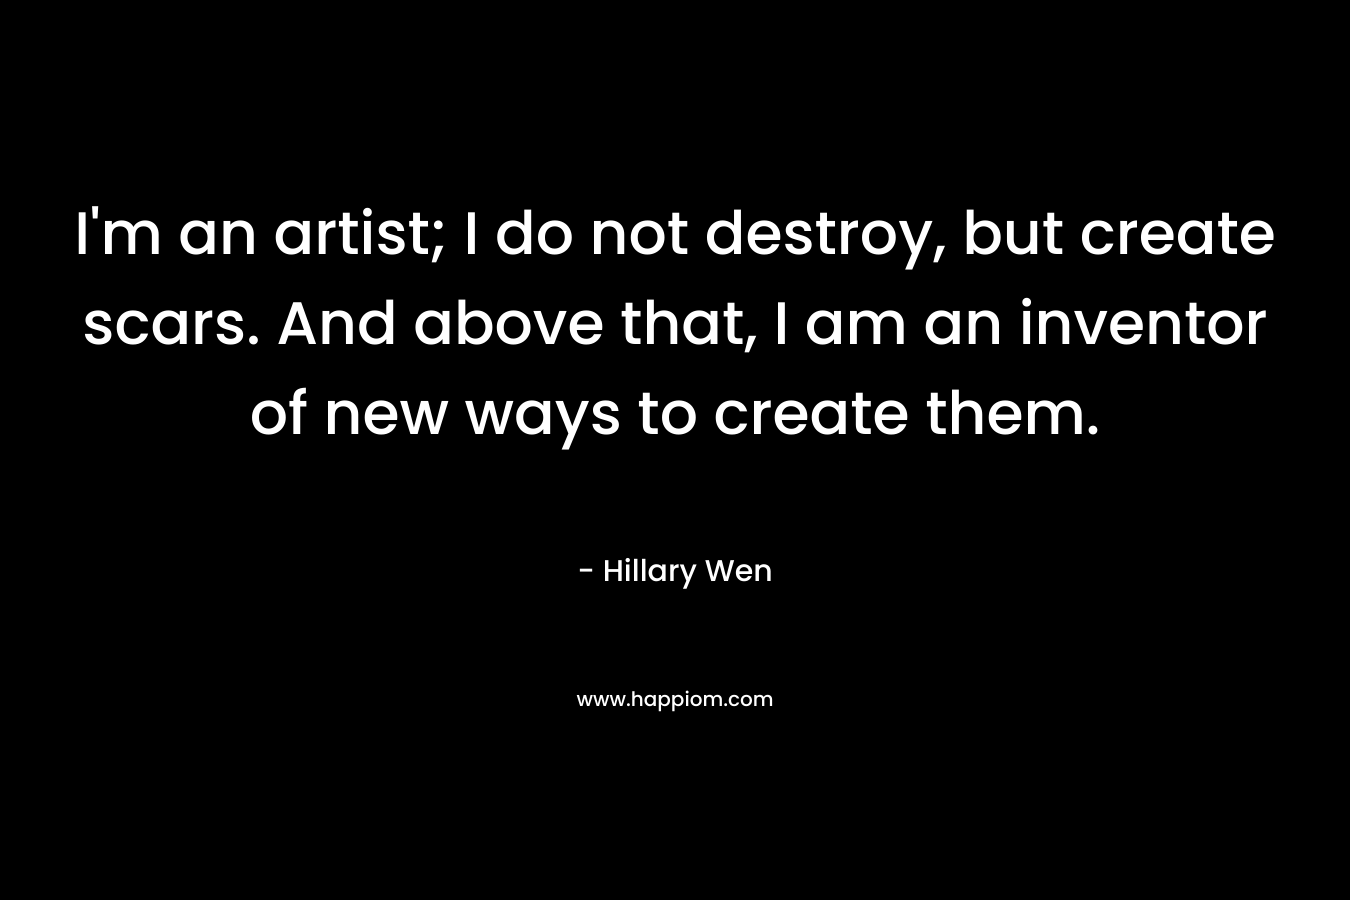 I'm an artist; I do not destroy, but create scars. And above that, I am an inventor of new ways to create them.